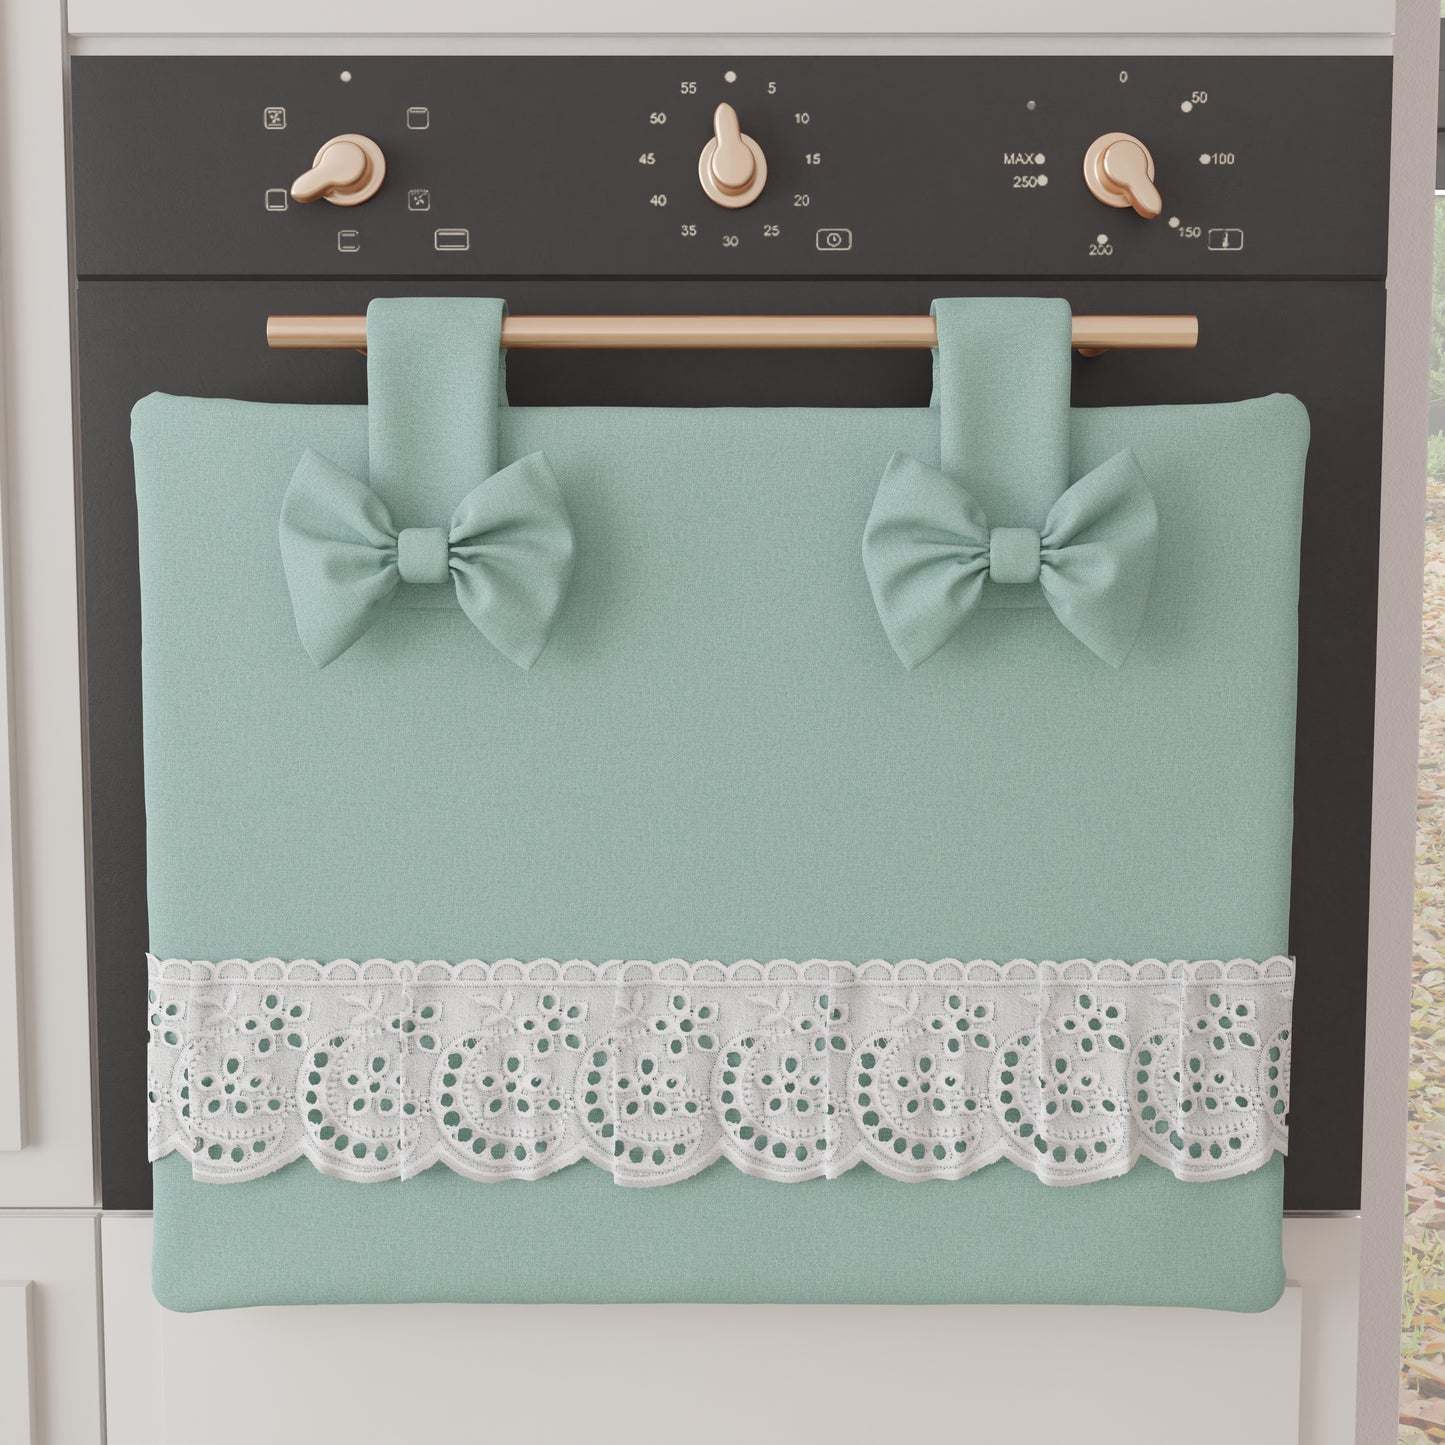 Elegant Shabby Chic Oven Cover with Lace and Teal Bows